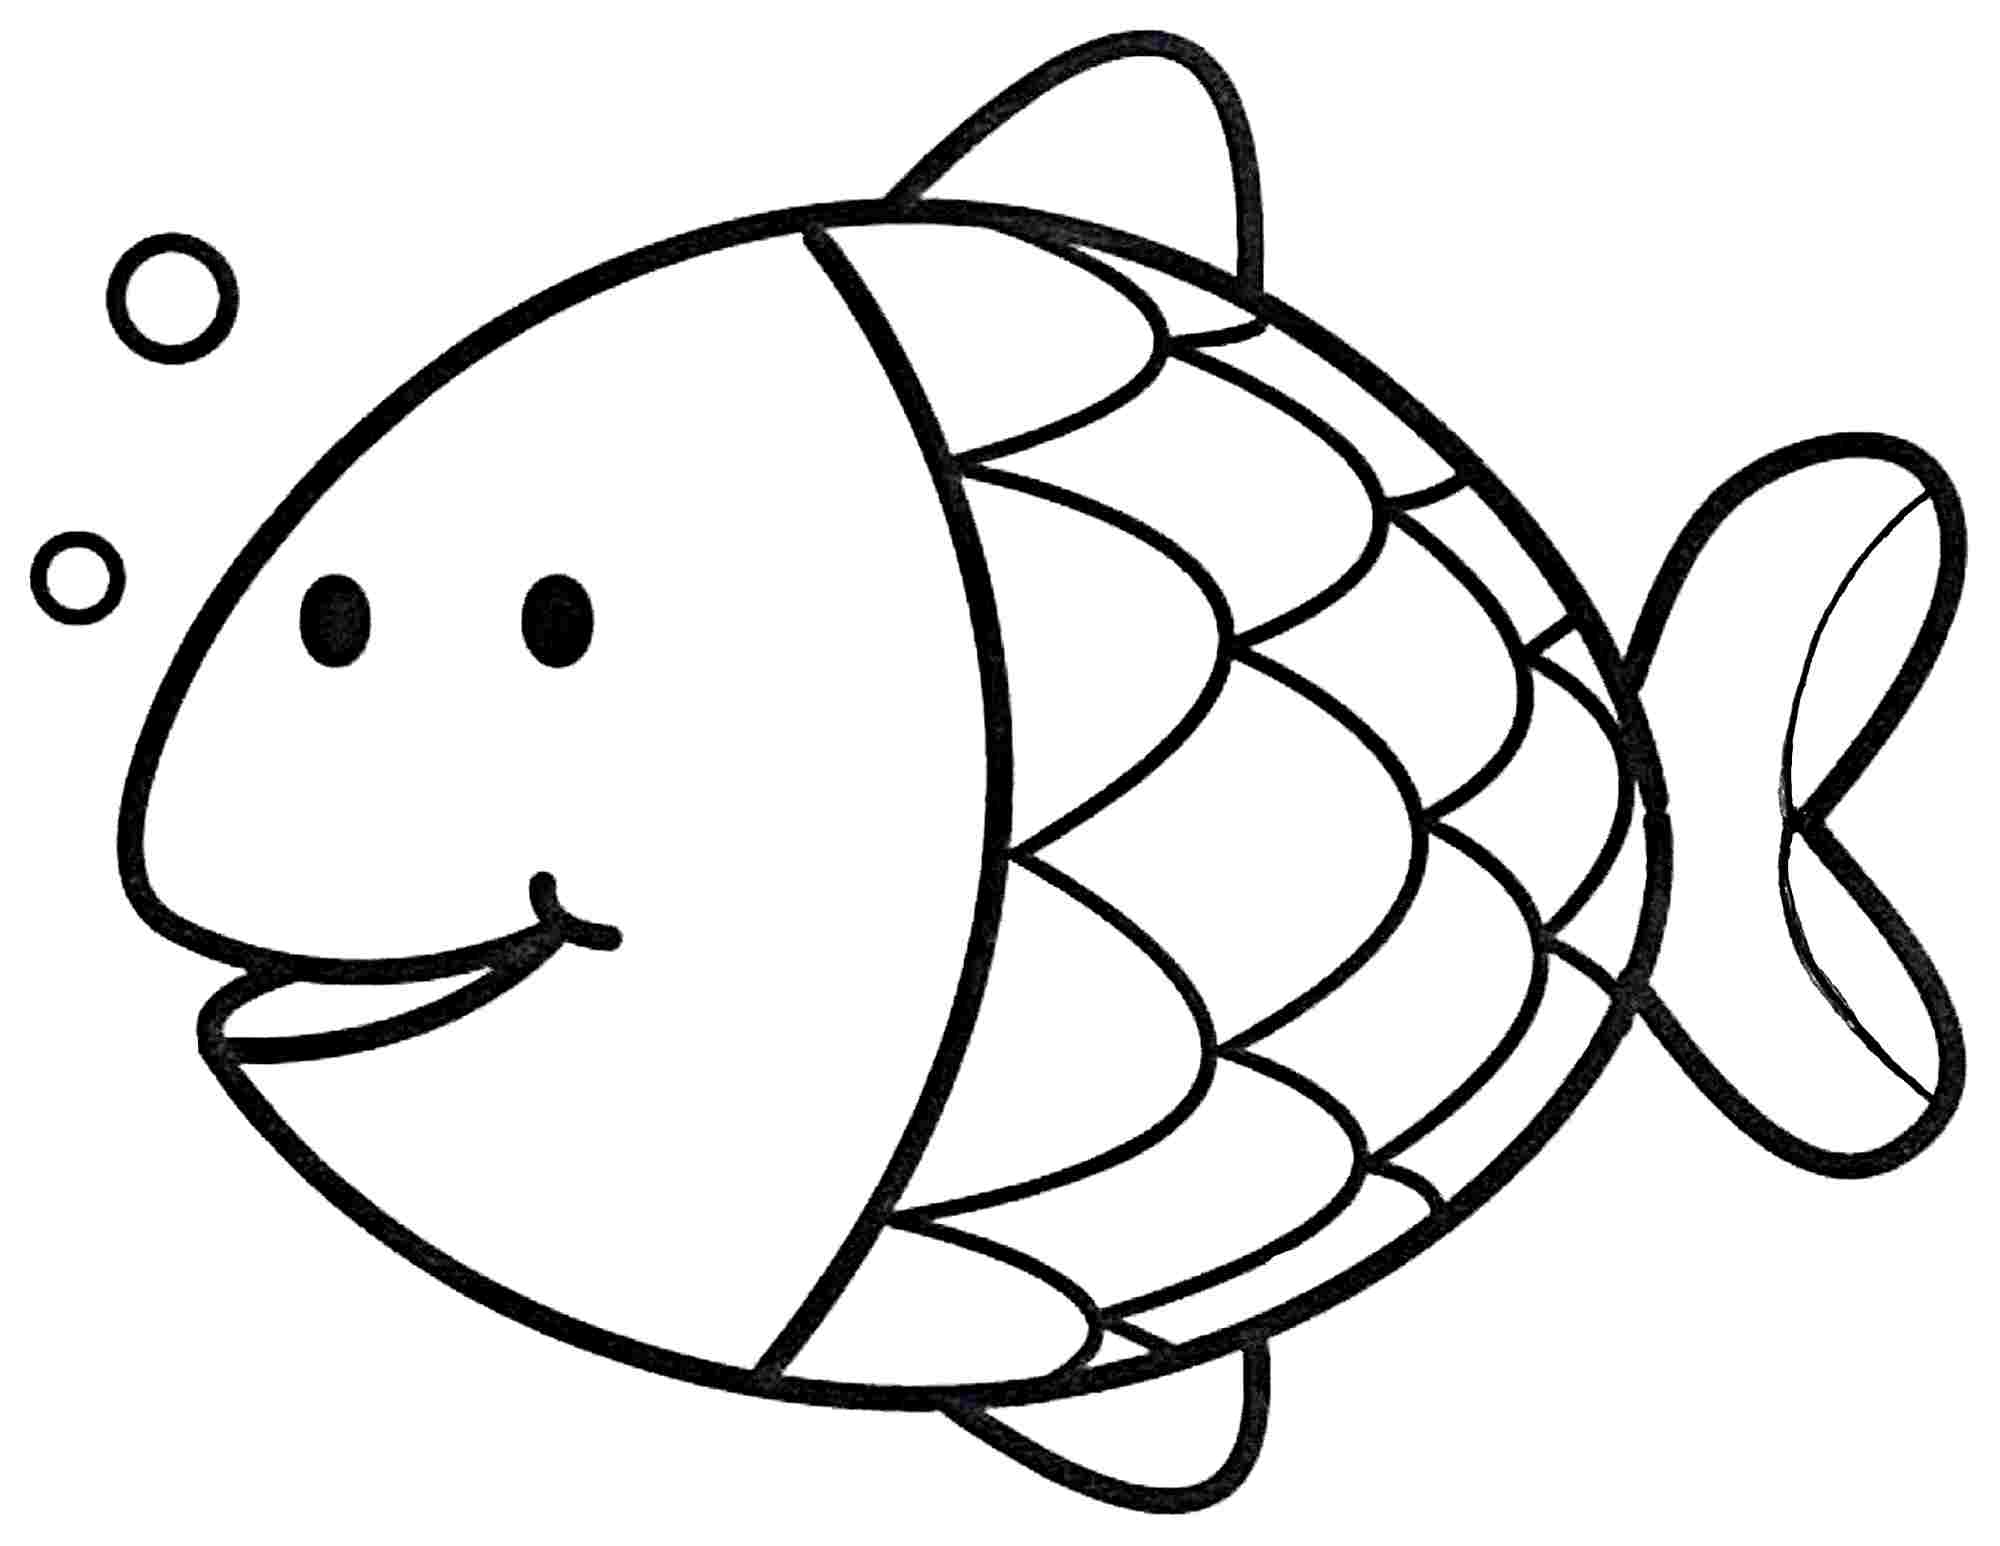 Free Simple Fish Coloring Page, Download Free Simple Fish Coloring Page